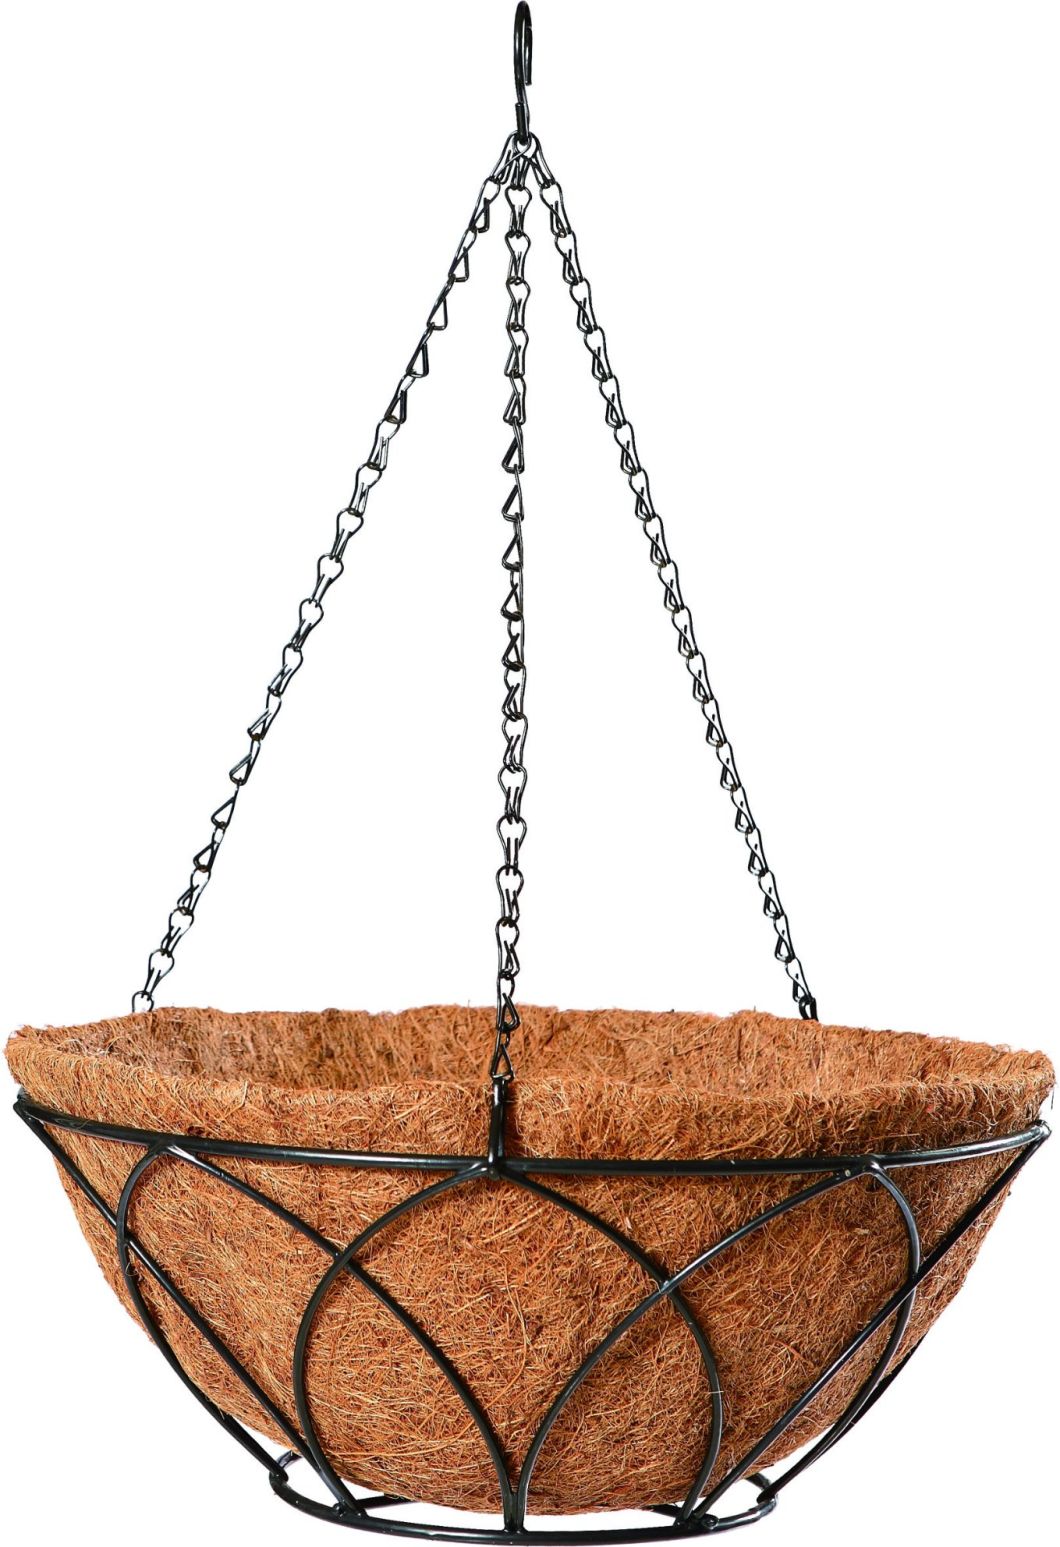 Modern Wrought Iron Hanging Flower Basket with Chain and Coco Liner (BH003758)